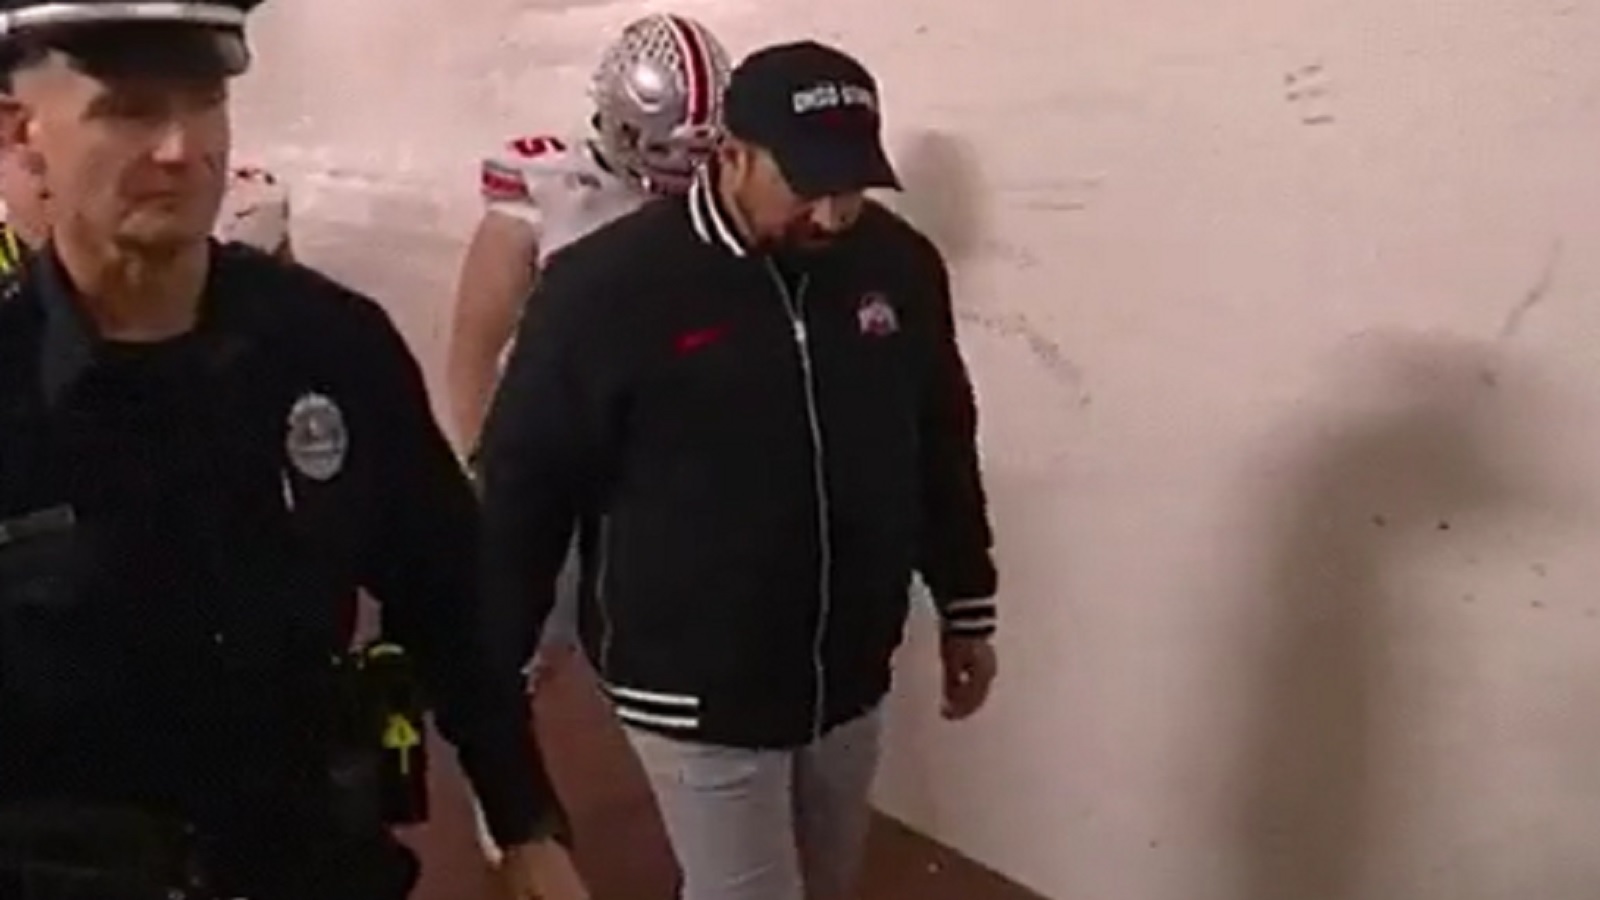 Ryan Day was so sad walking through tunnel after loss to Michigan